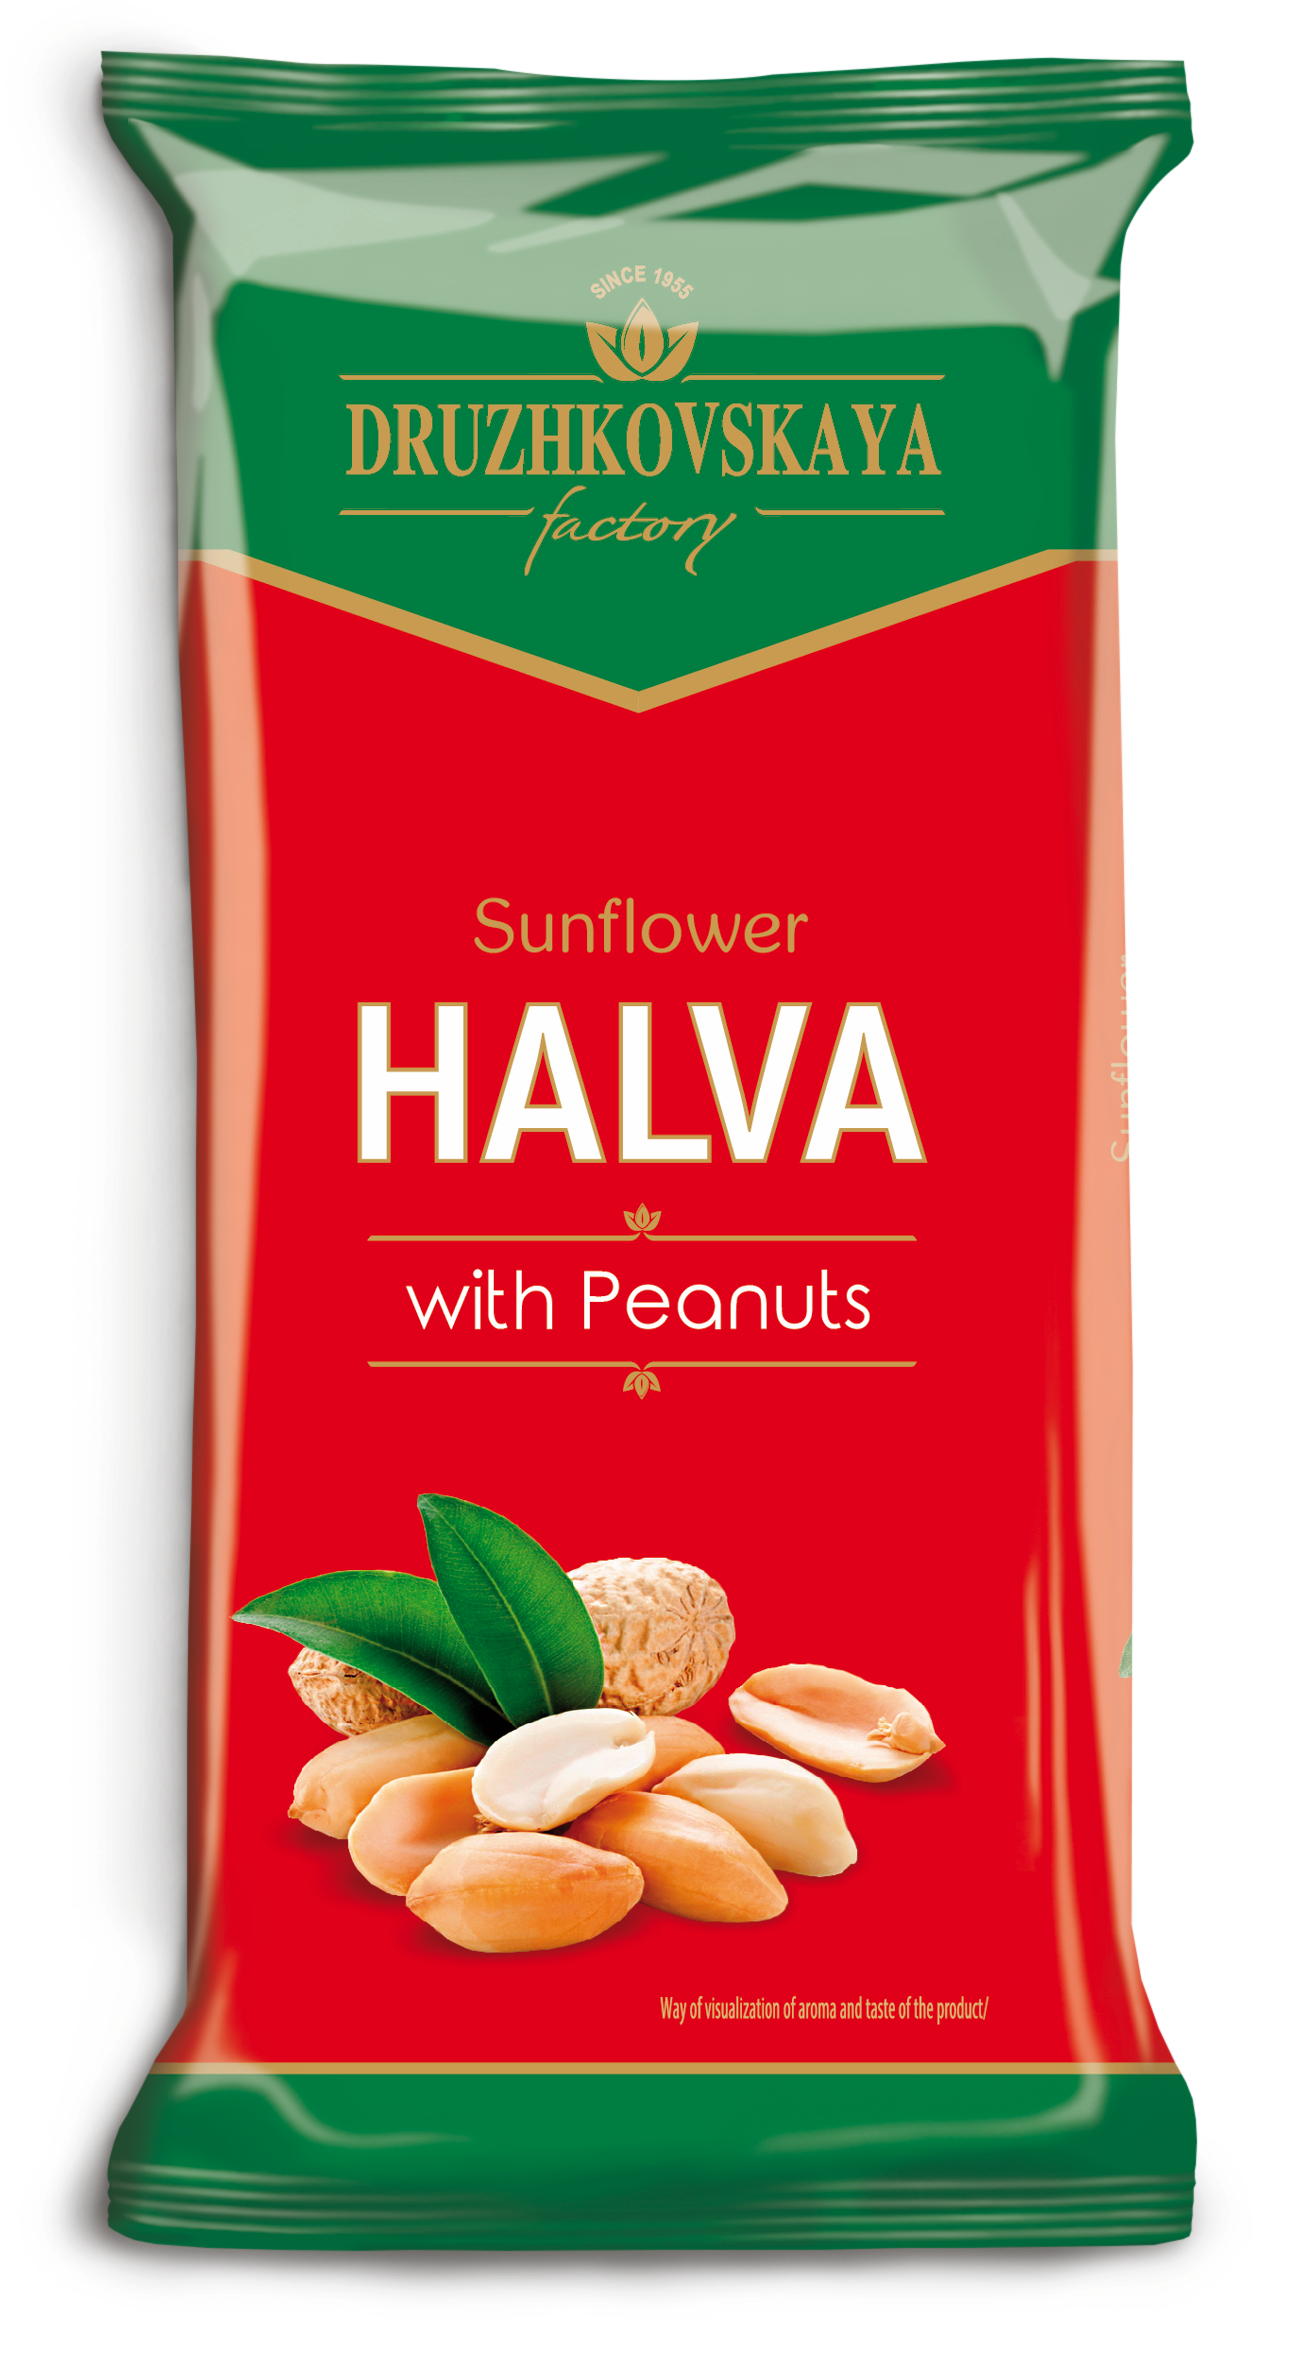 Sunflower Halva with Peanuts Packed in Flow-pack, 300 g